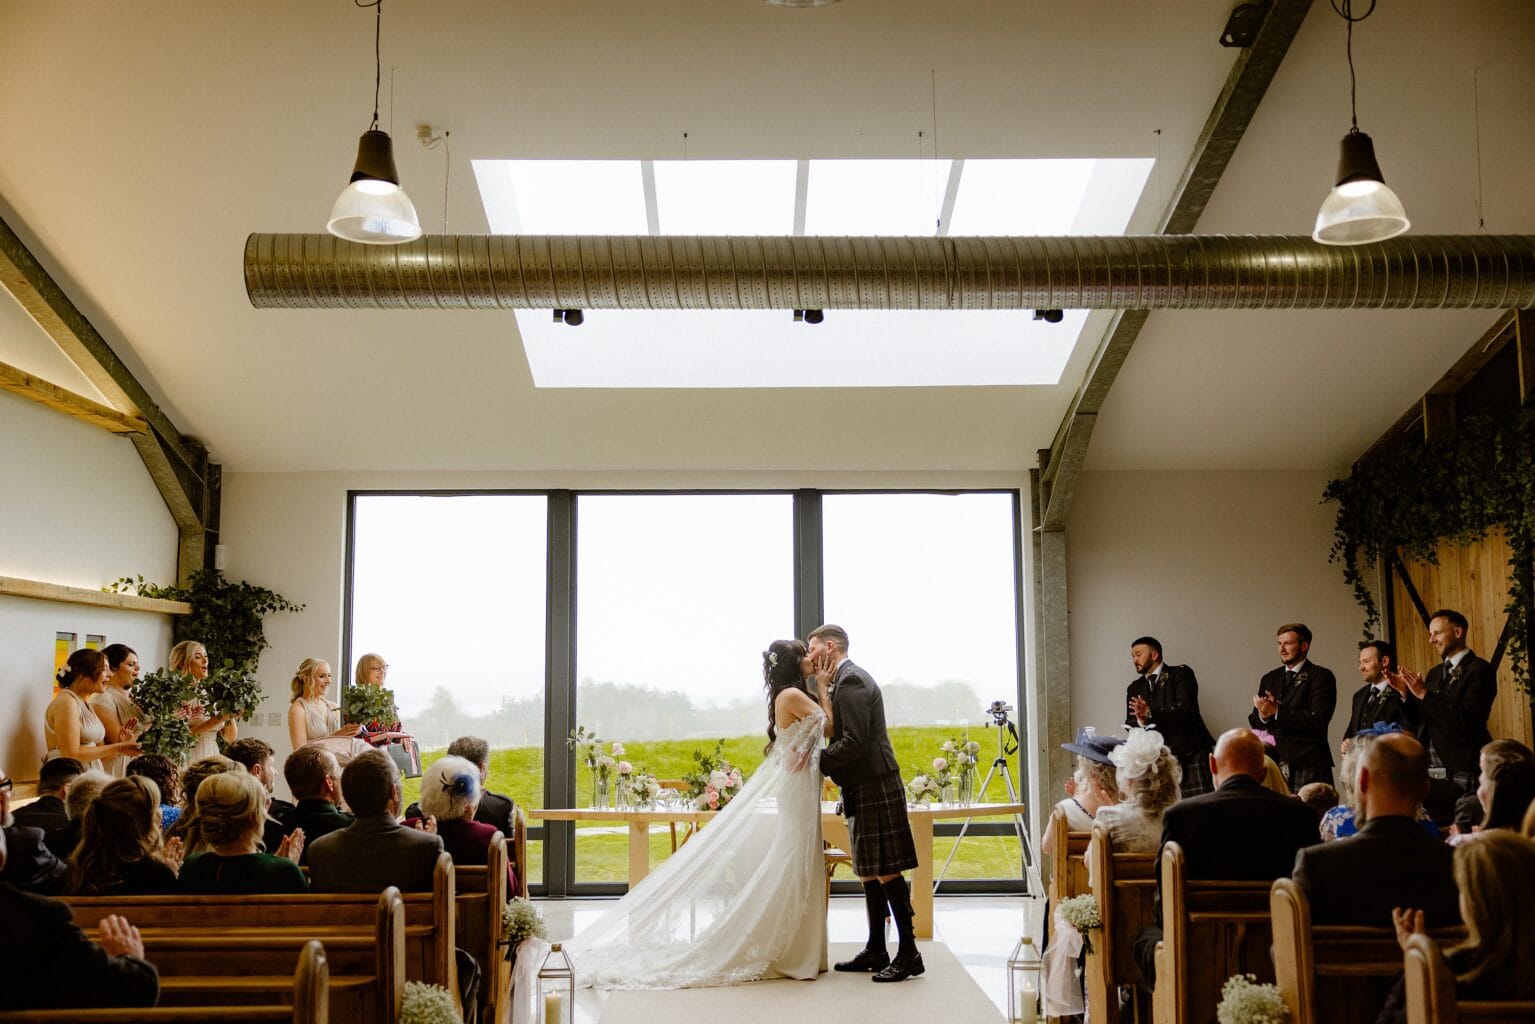 guests applaud the bride and groom's first kiss during their wedding ceremony at barn wedding venues west lothian in scotland they are standing in front of a large window with grass and trees visible in the background